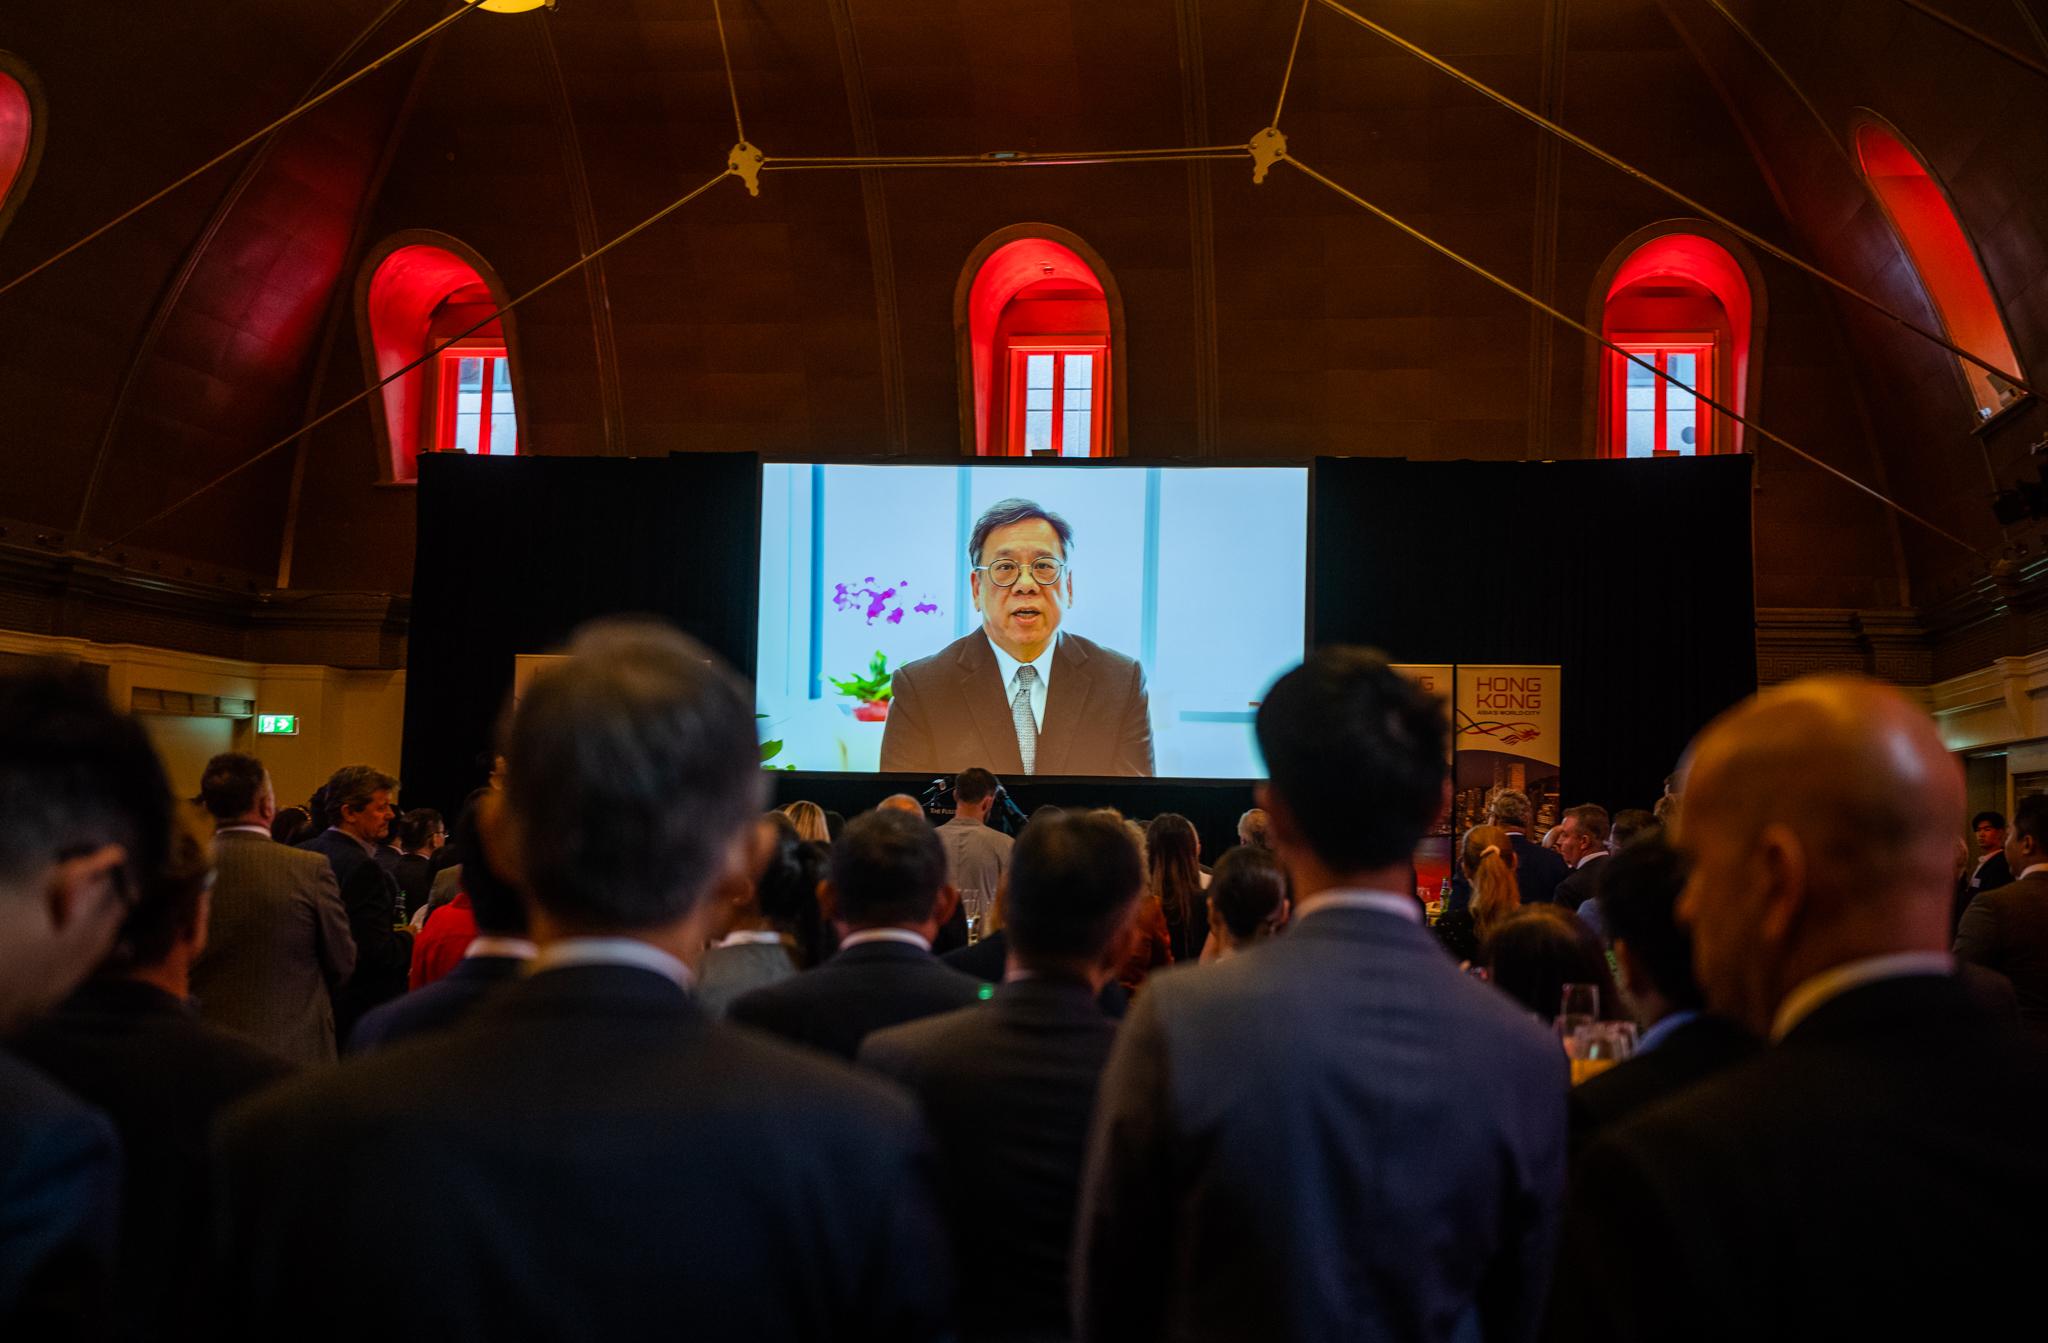 The Hong Kong Economic and Trade Office, Sydney hosted a reception in Sydney, Australia, today (February 7) to celebrate the Year of the Rabbit. Photo shows the Secretary for Commerce and Economic Development, Mr Algernon Yau, delivering a virtual speech to highlight Hong Kong's latest developments and its unique advantages.